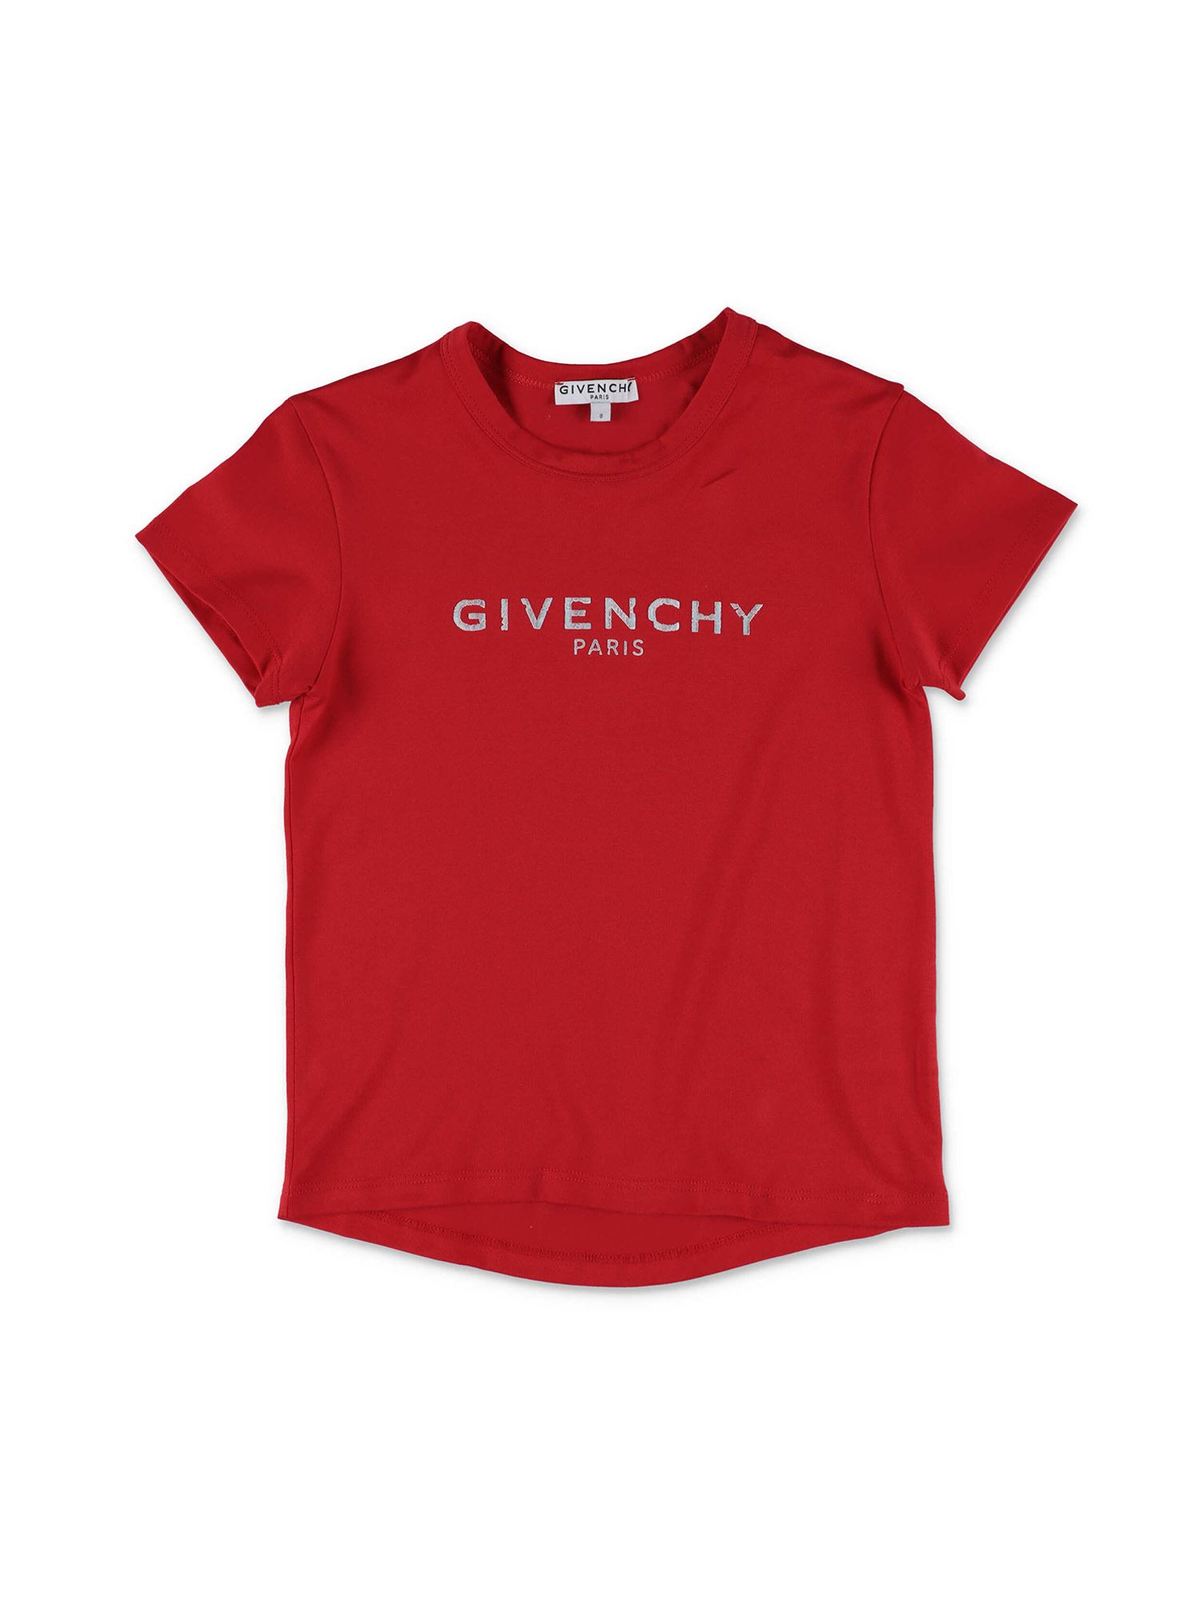 GIVENCHY LOGO T-SHIRT IN RED